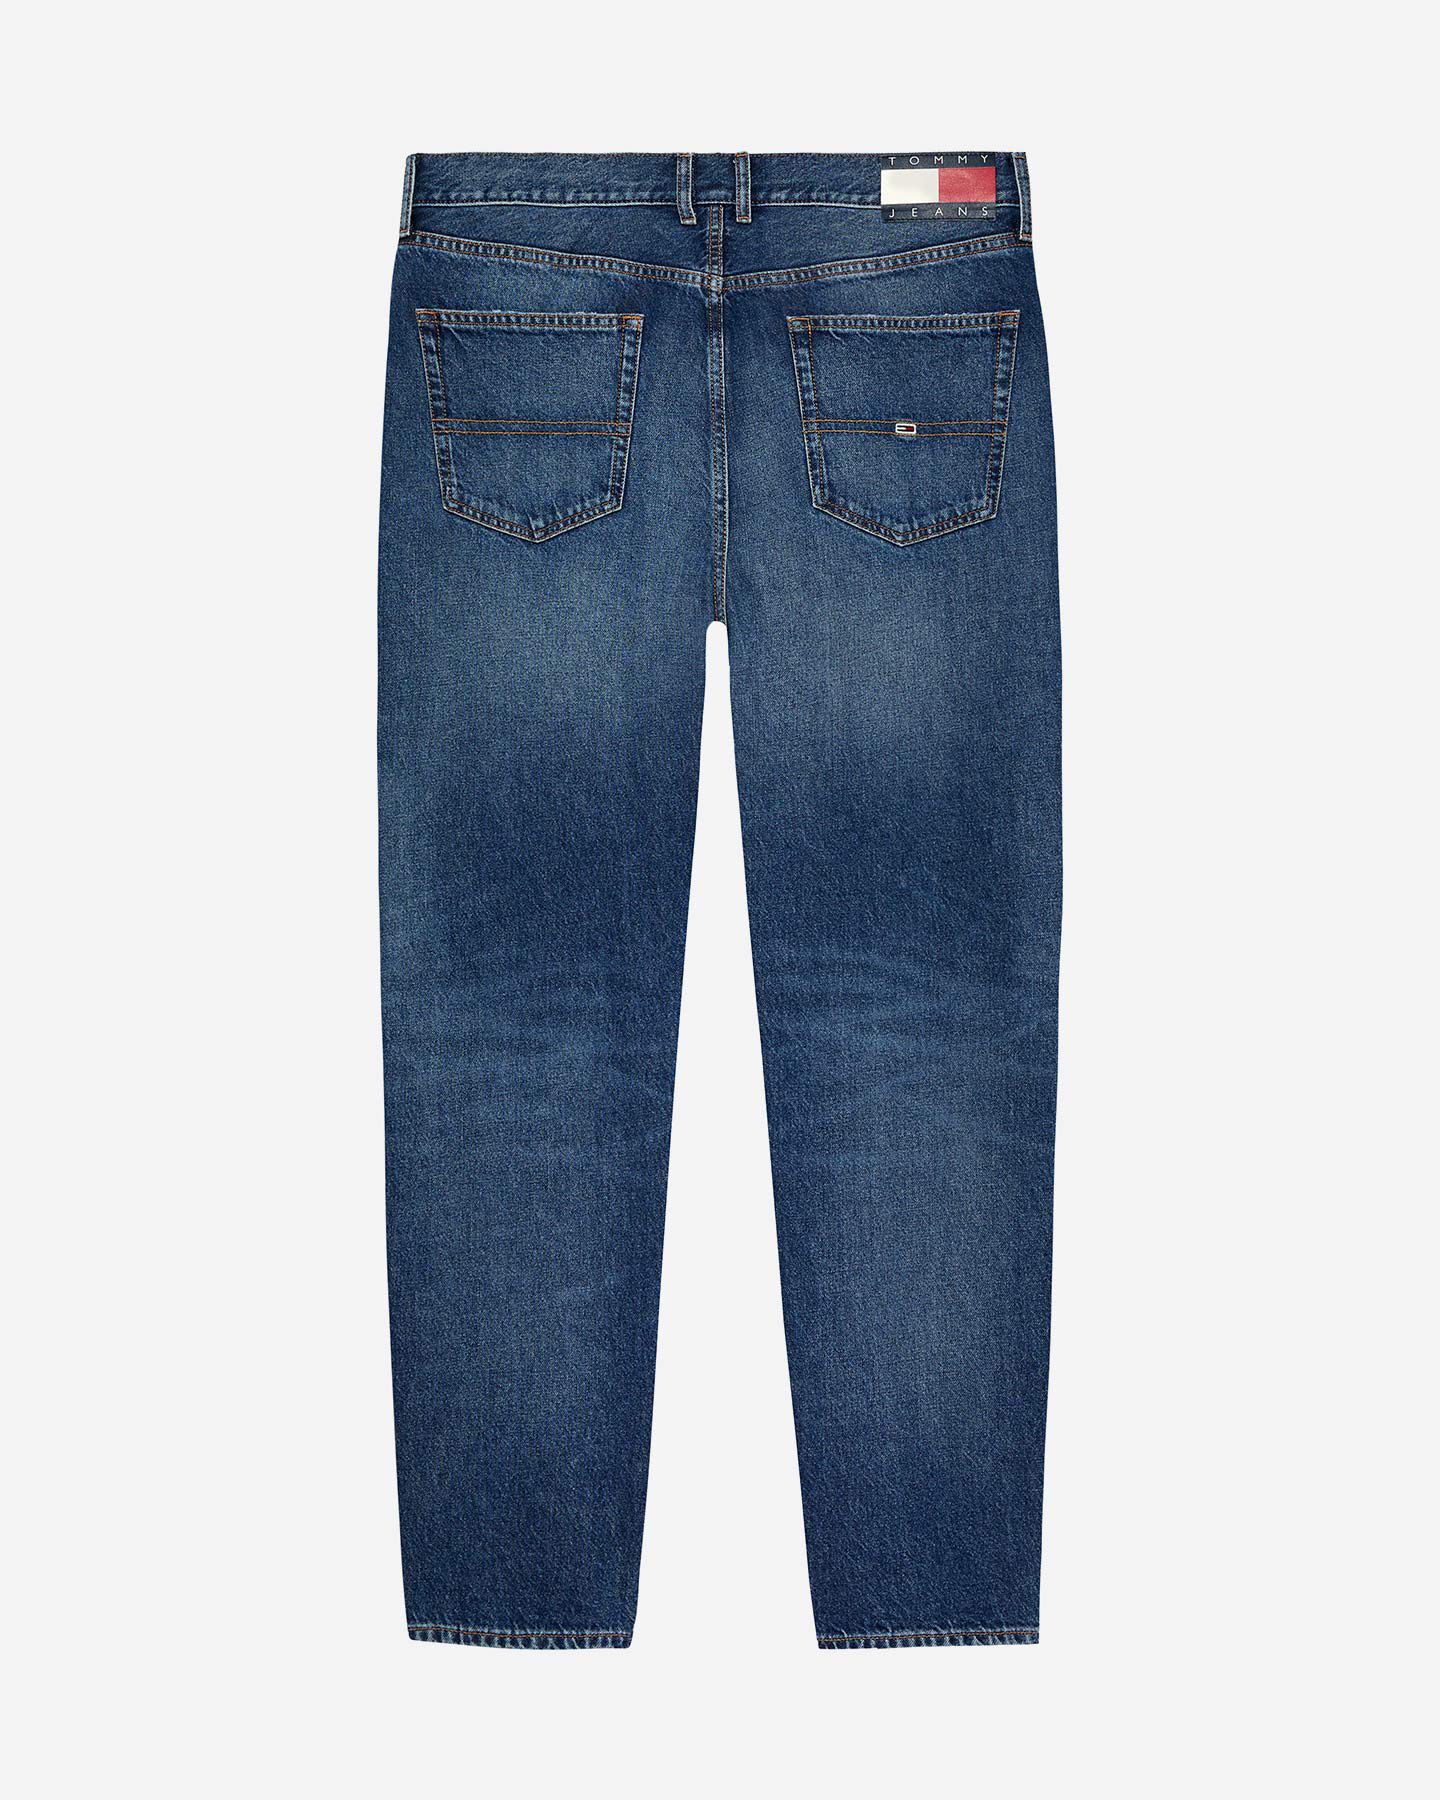  Jeans TOMMY HILFIGER ISAAC TAPERED M S5686198|UNI|32/30 scatto 1